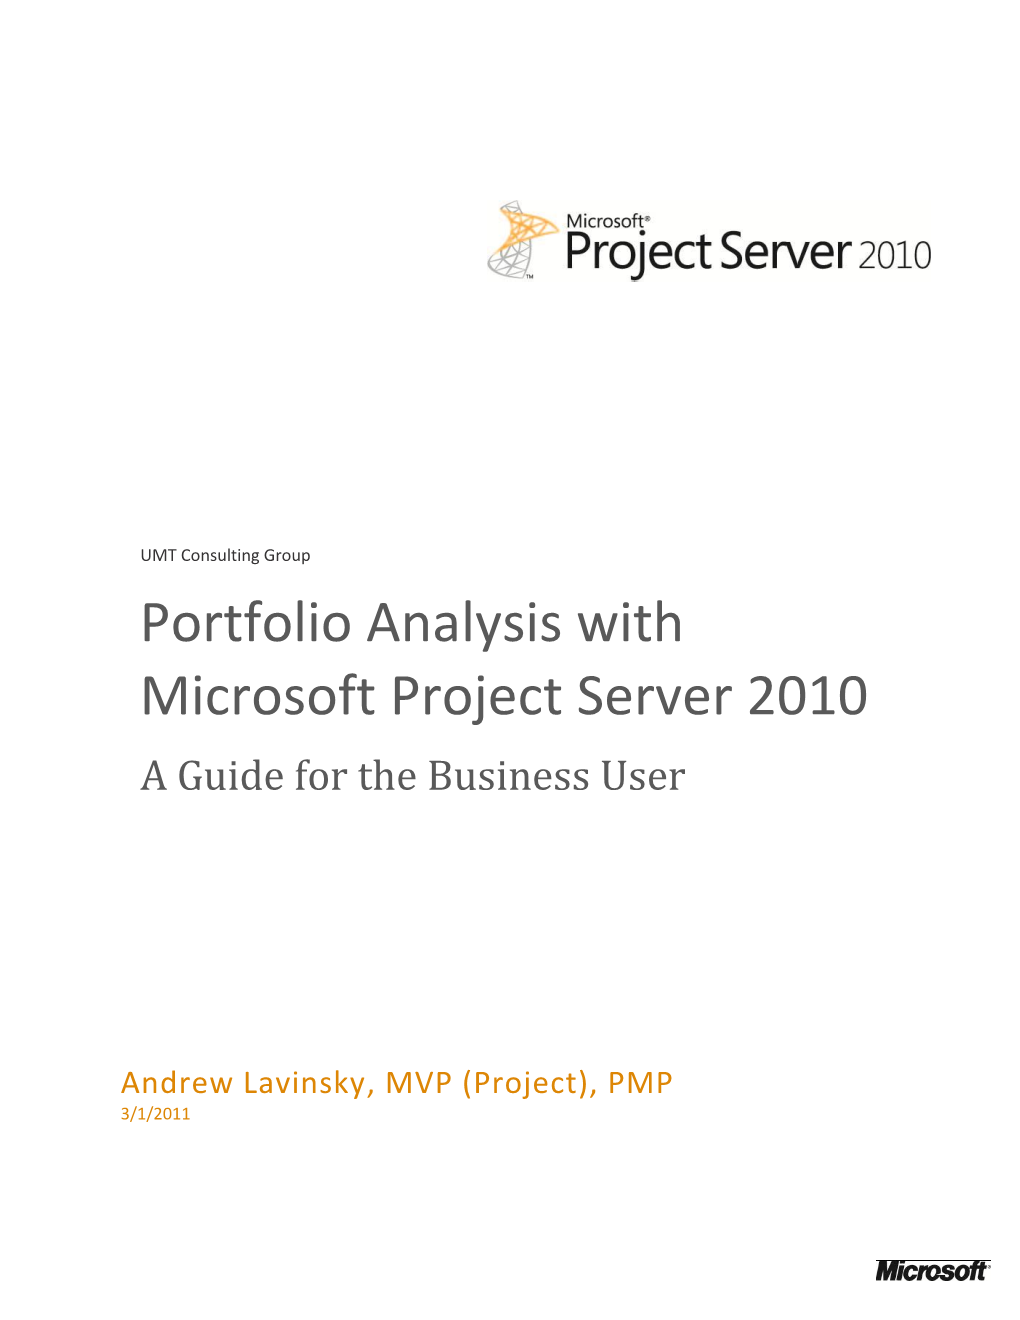 Portfolio Analysis with Microsoft Project Server 2010 a Guide for the Business User